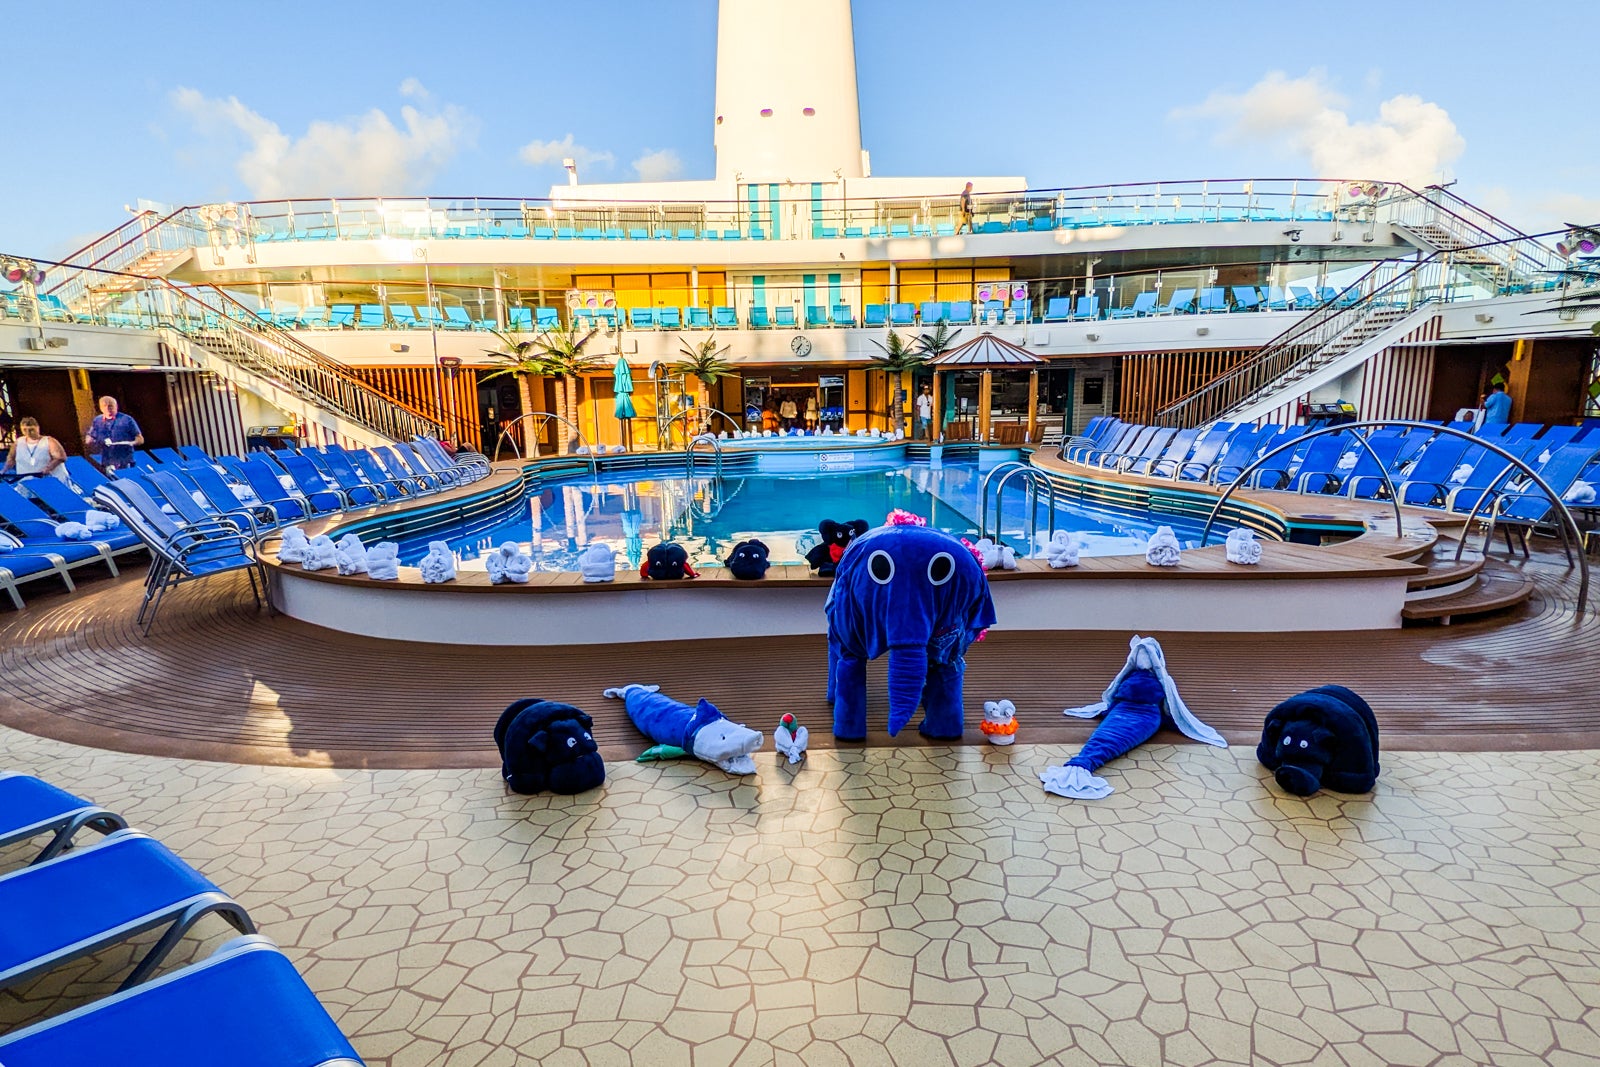 Cruise ship pool deck decorated with towel animals